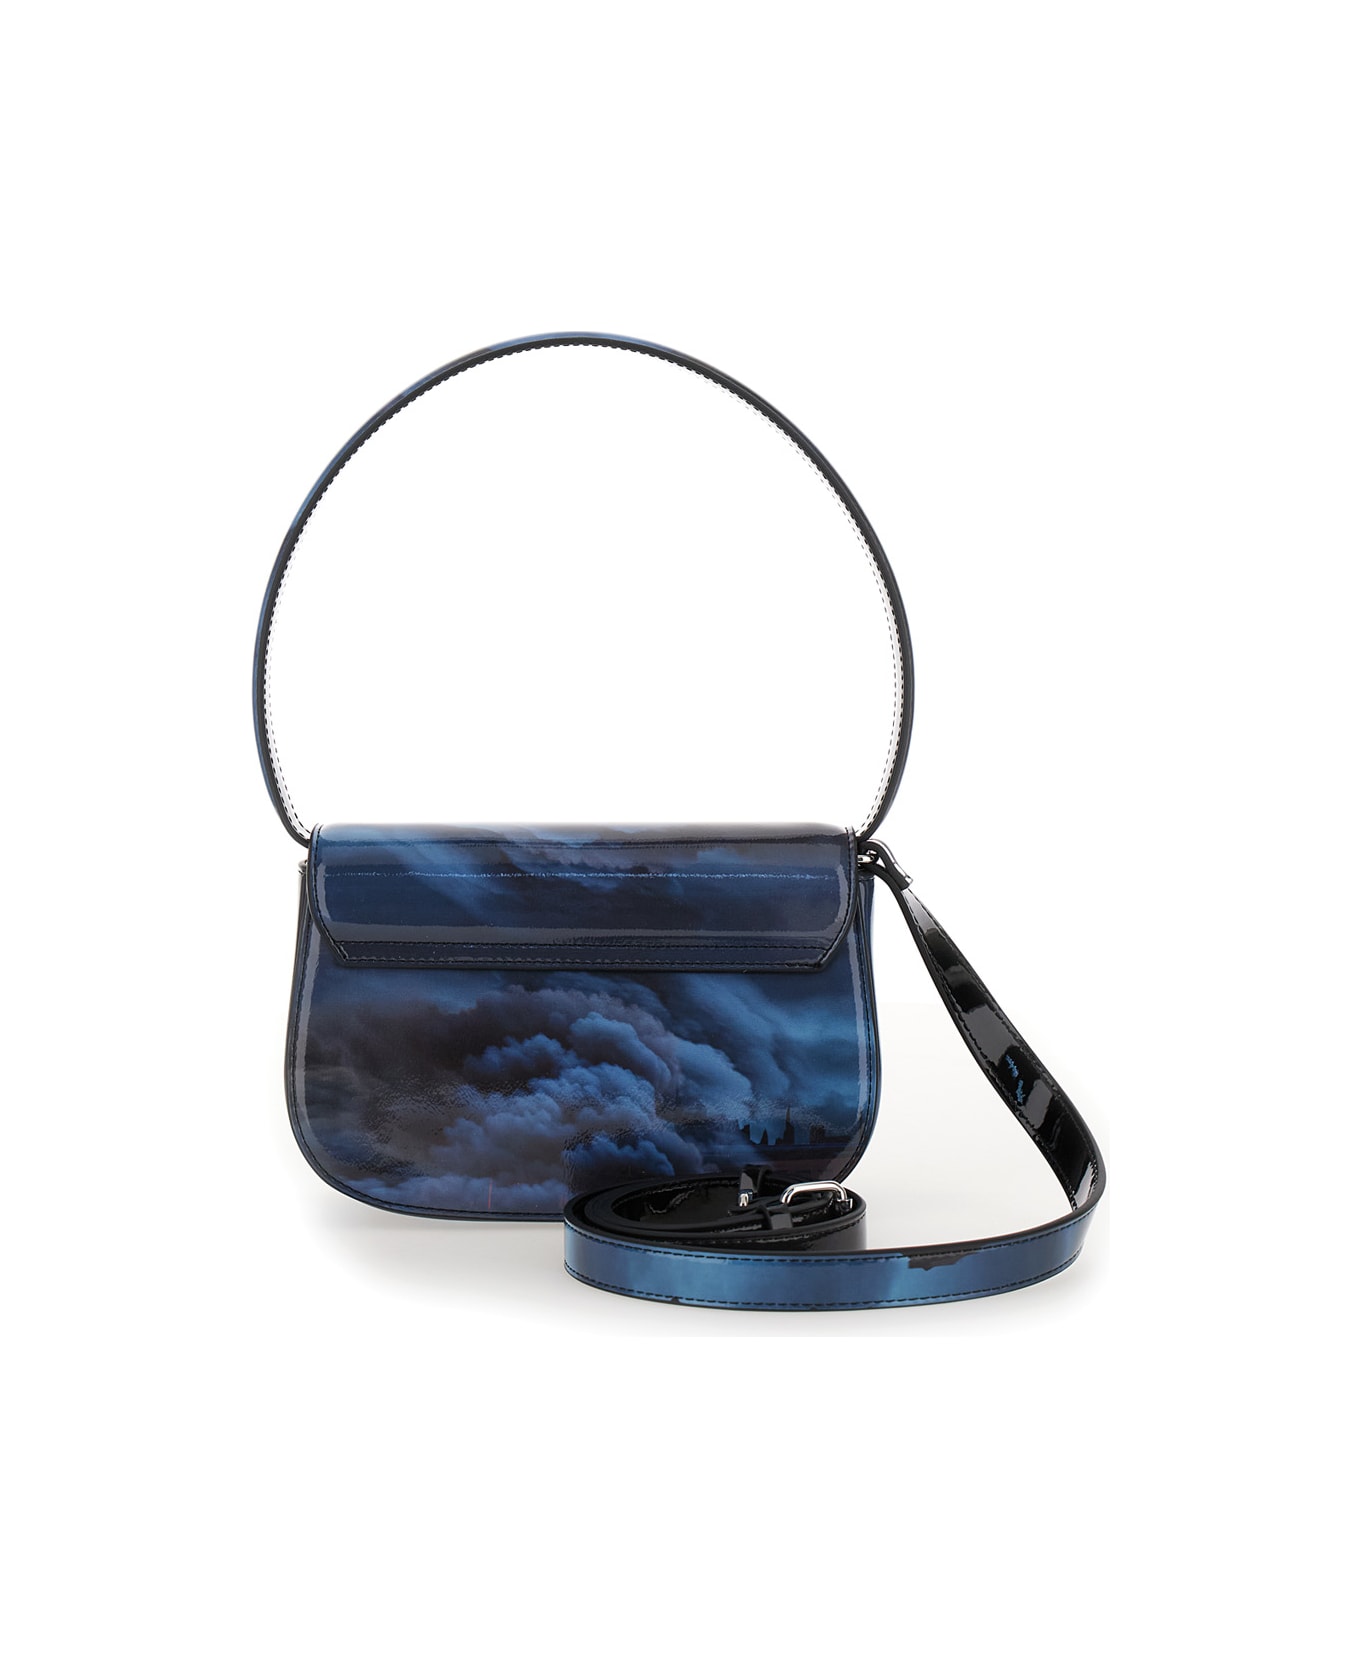 Diesel '1dr' Blue And Orange Shoulder Bag With Front Metallic Oval D Logo In Techno Fabric Woman - Black